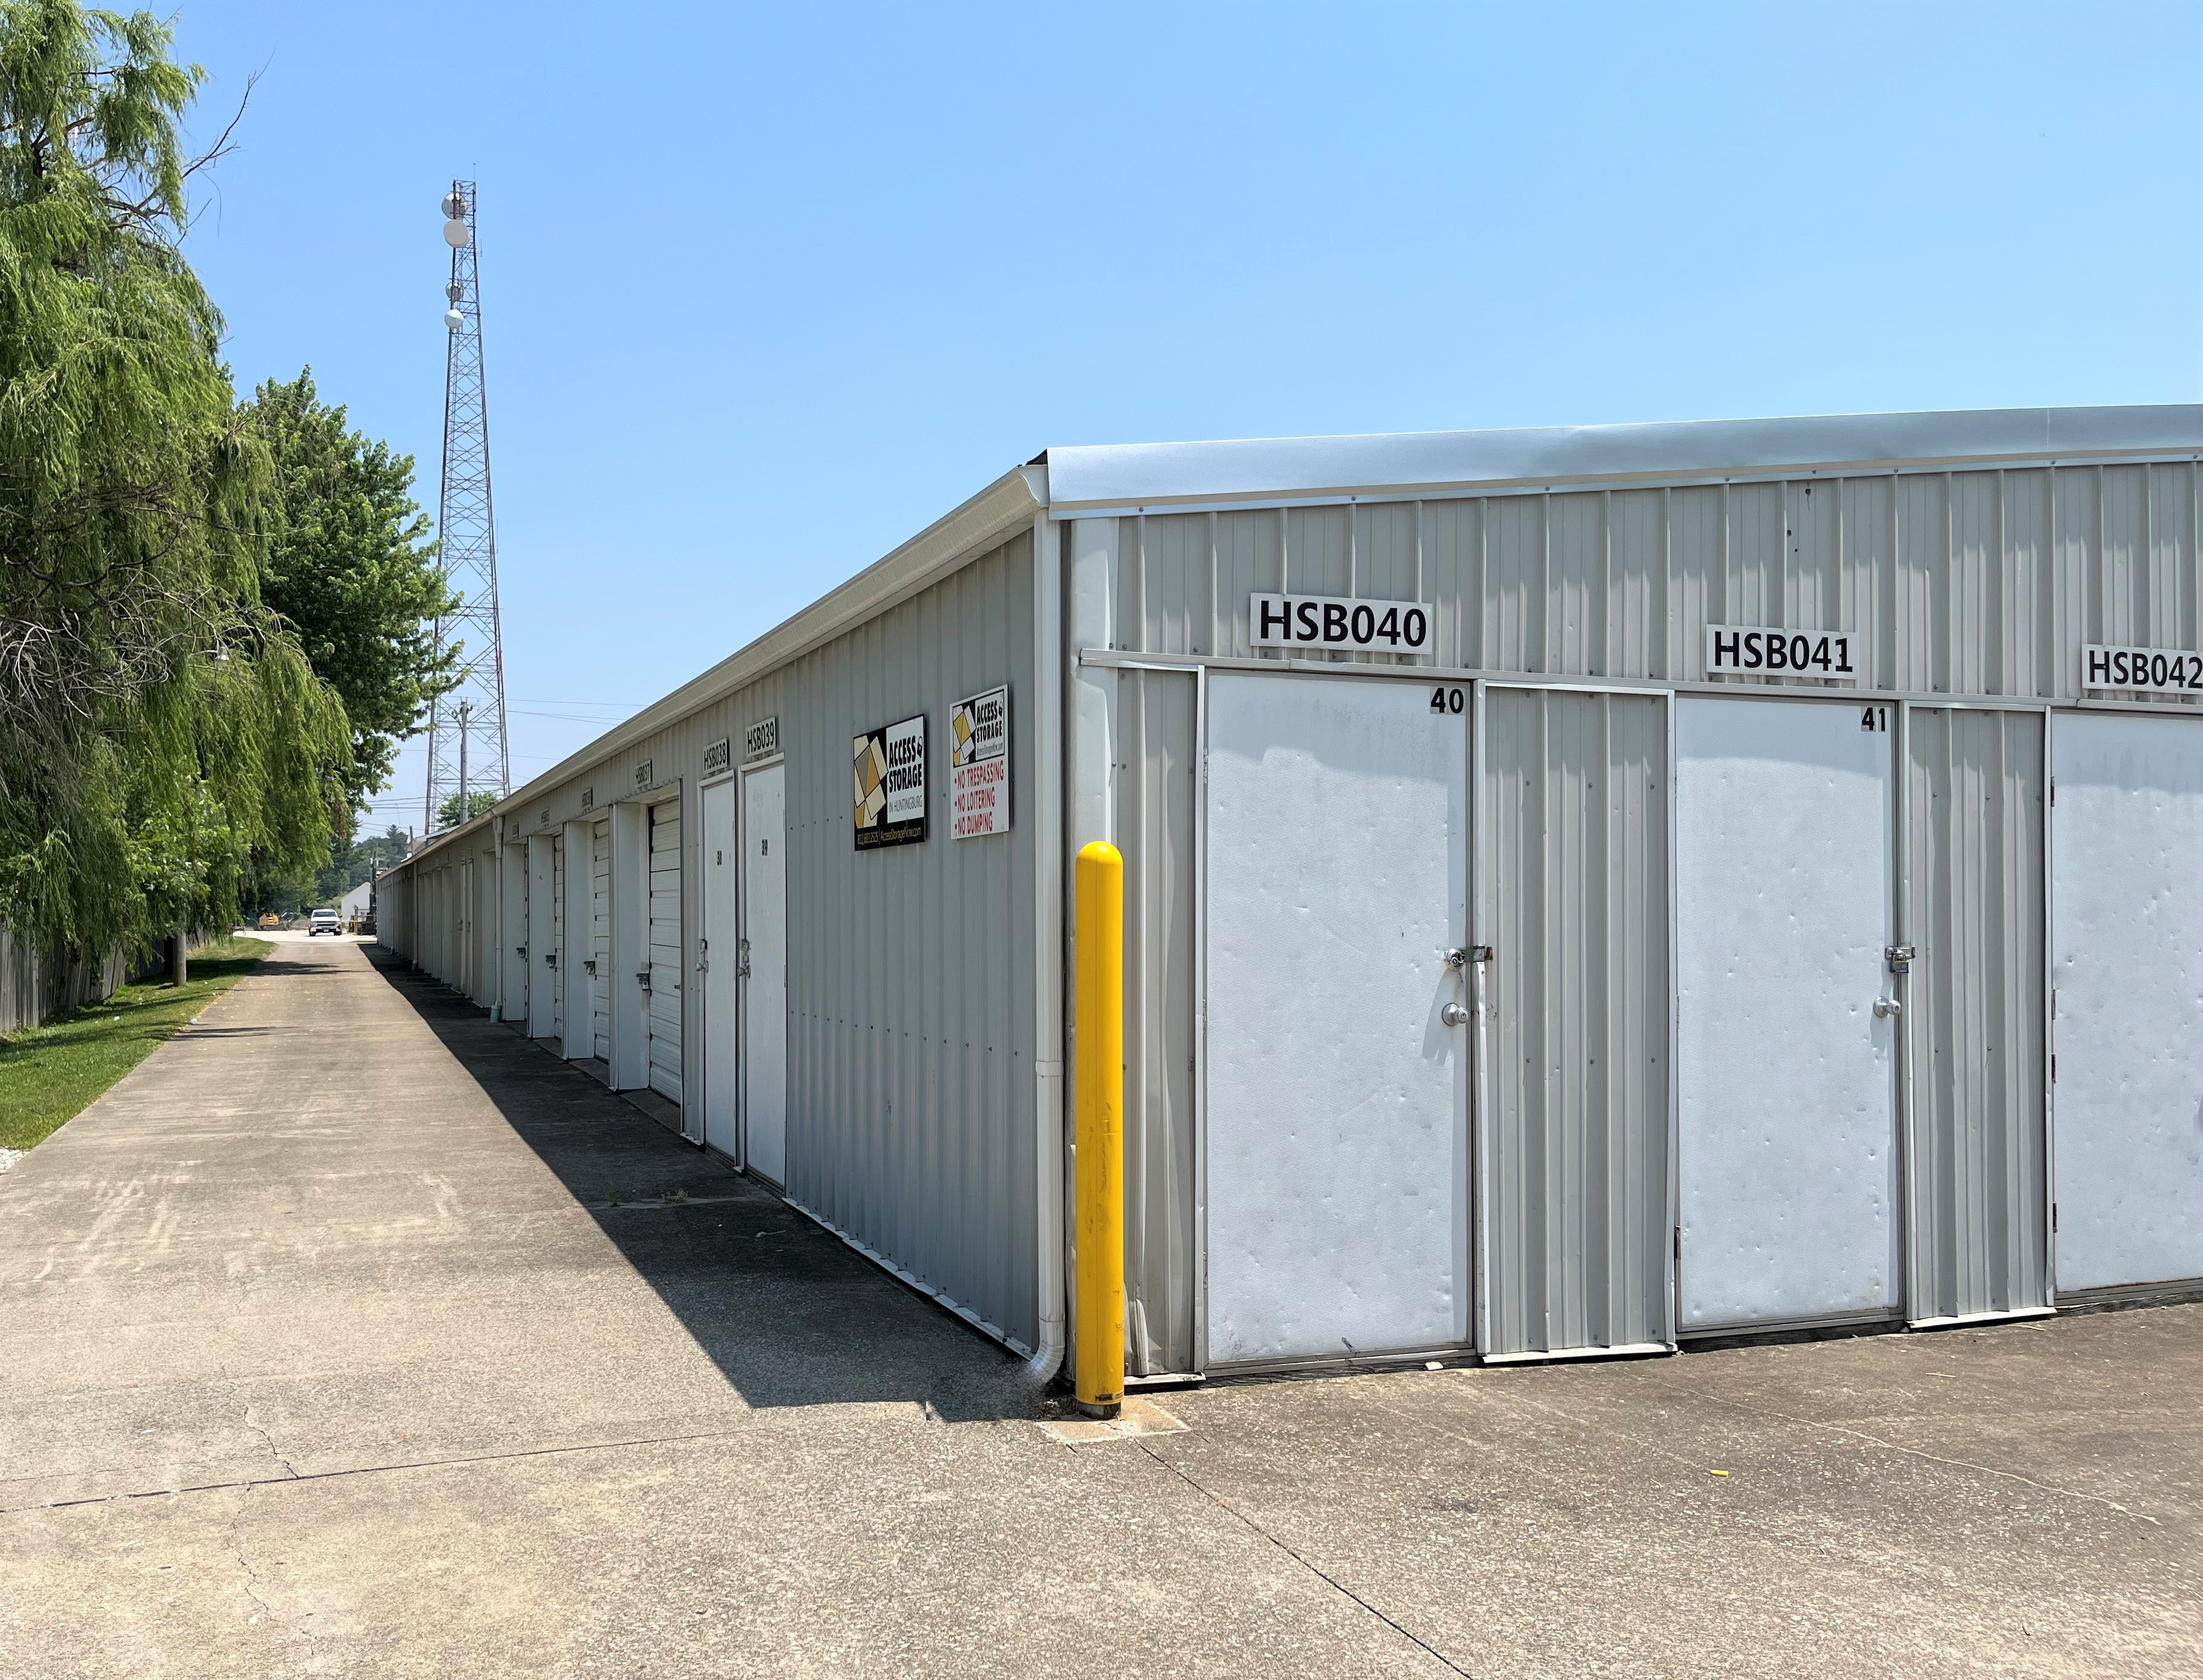 Paved driveways leading to white-door drive-up storage units, offering secure space in Huntingburg, IN.